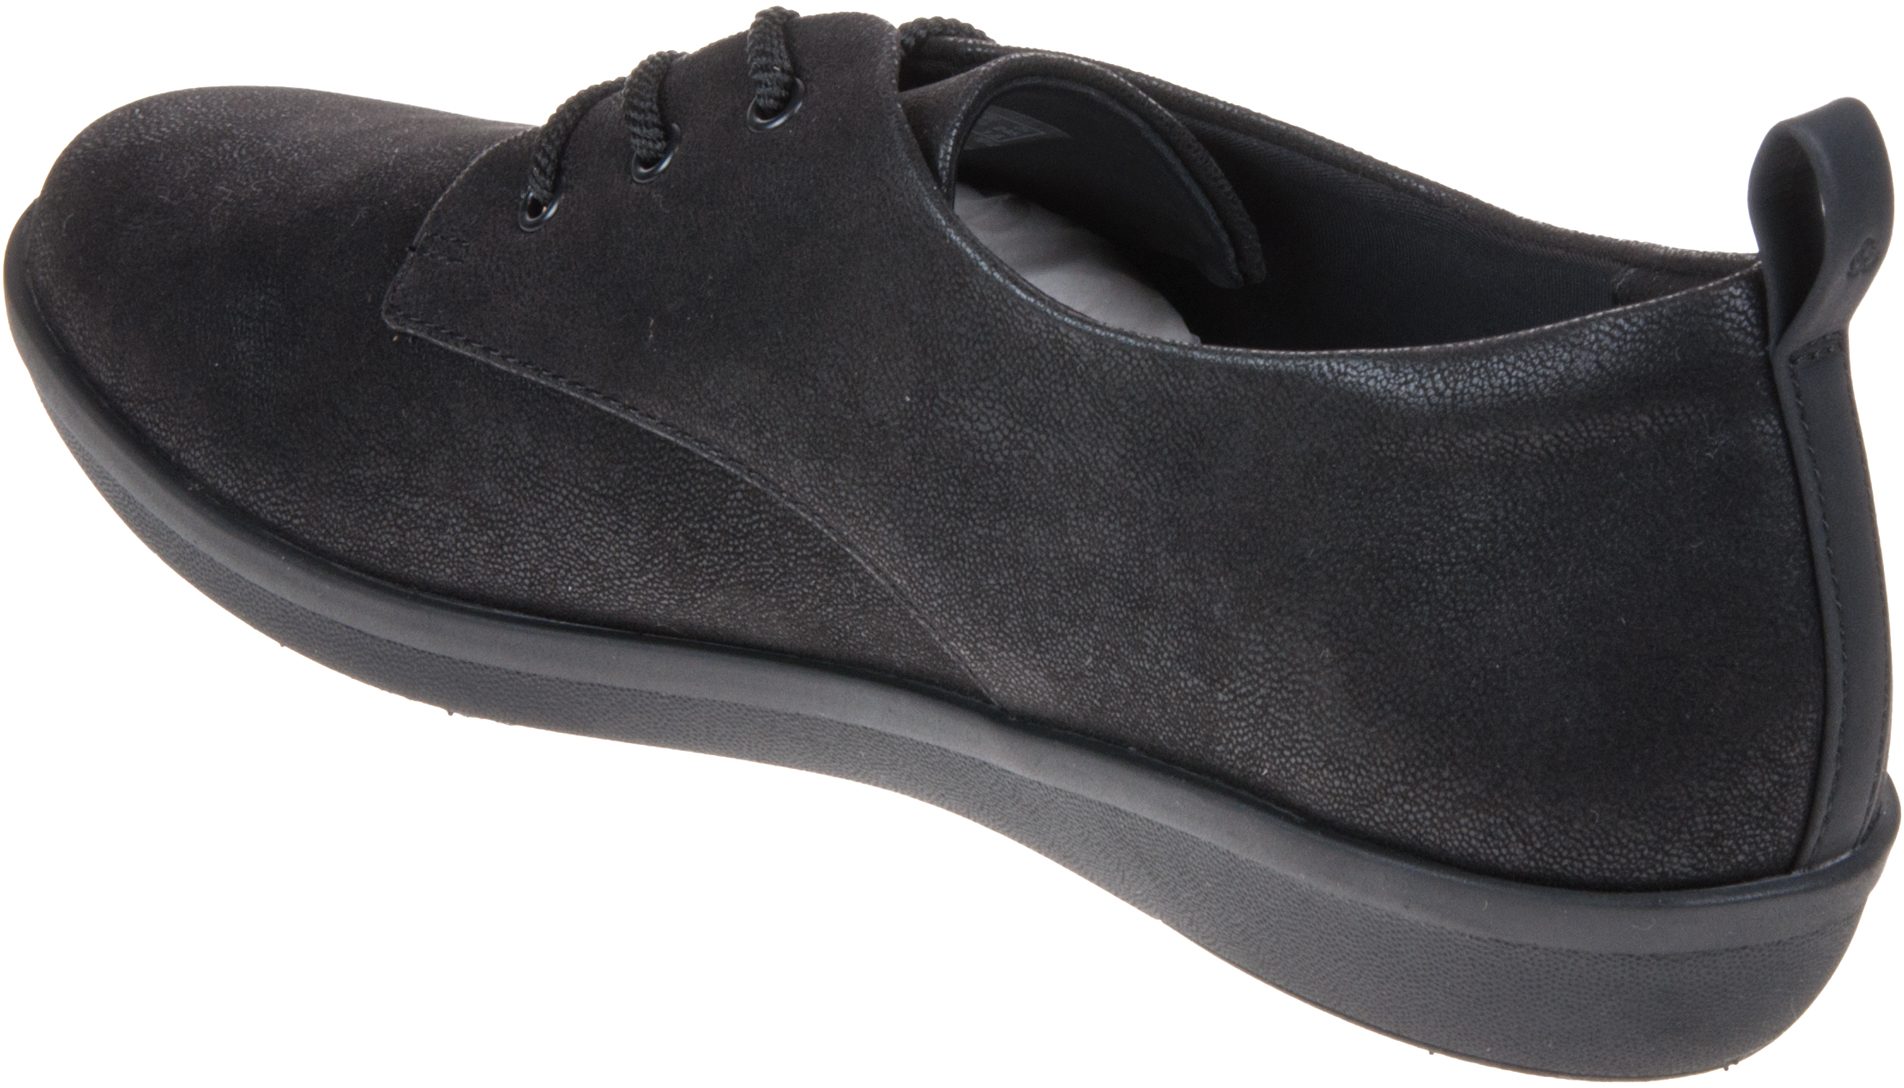 Clarks Ayla Reece Black Synthetic 26142193 - Everyday Shoes - Humphries ...